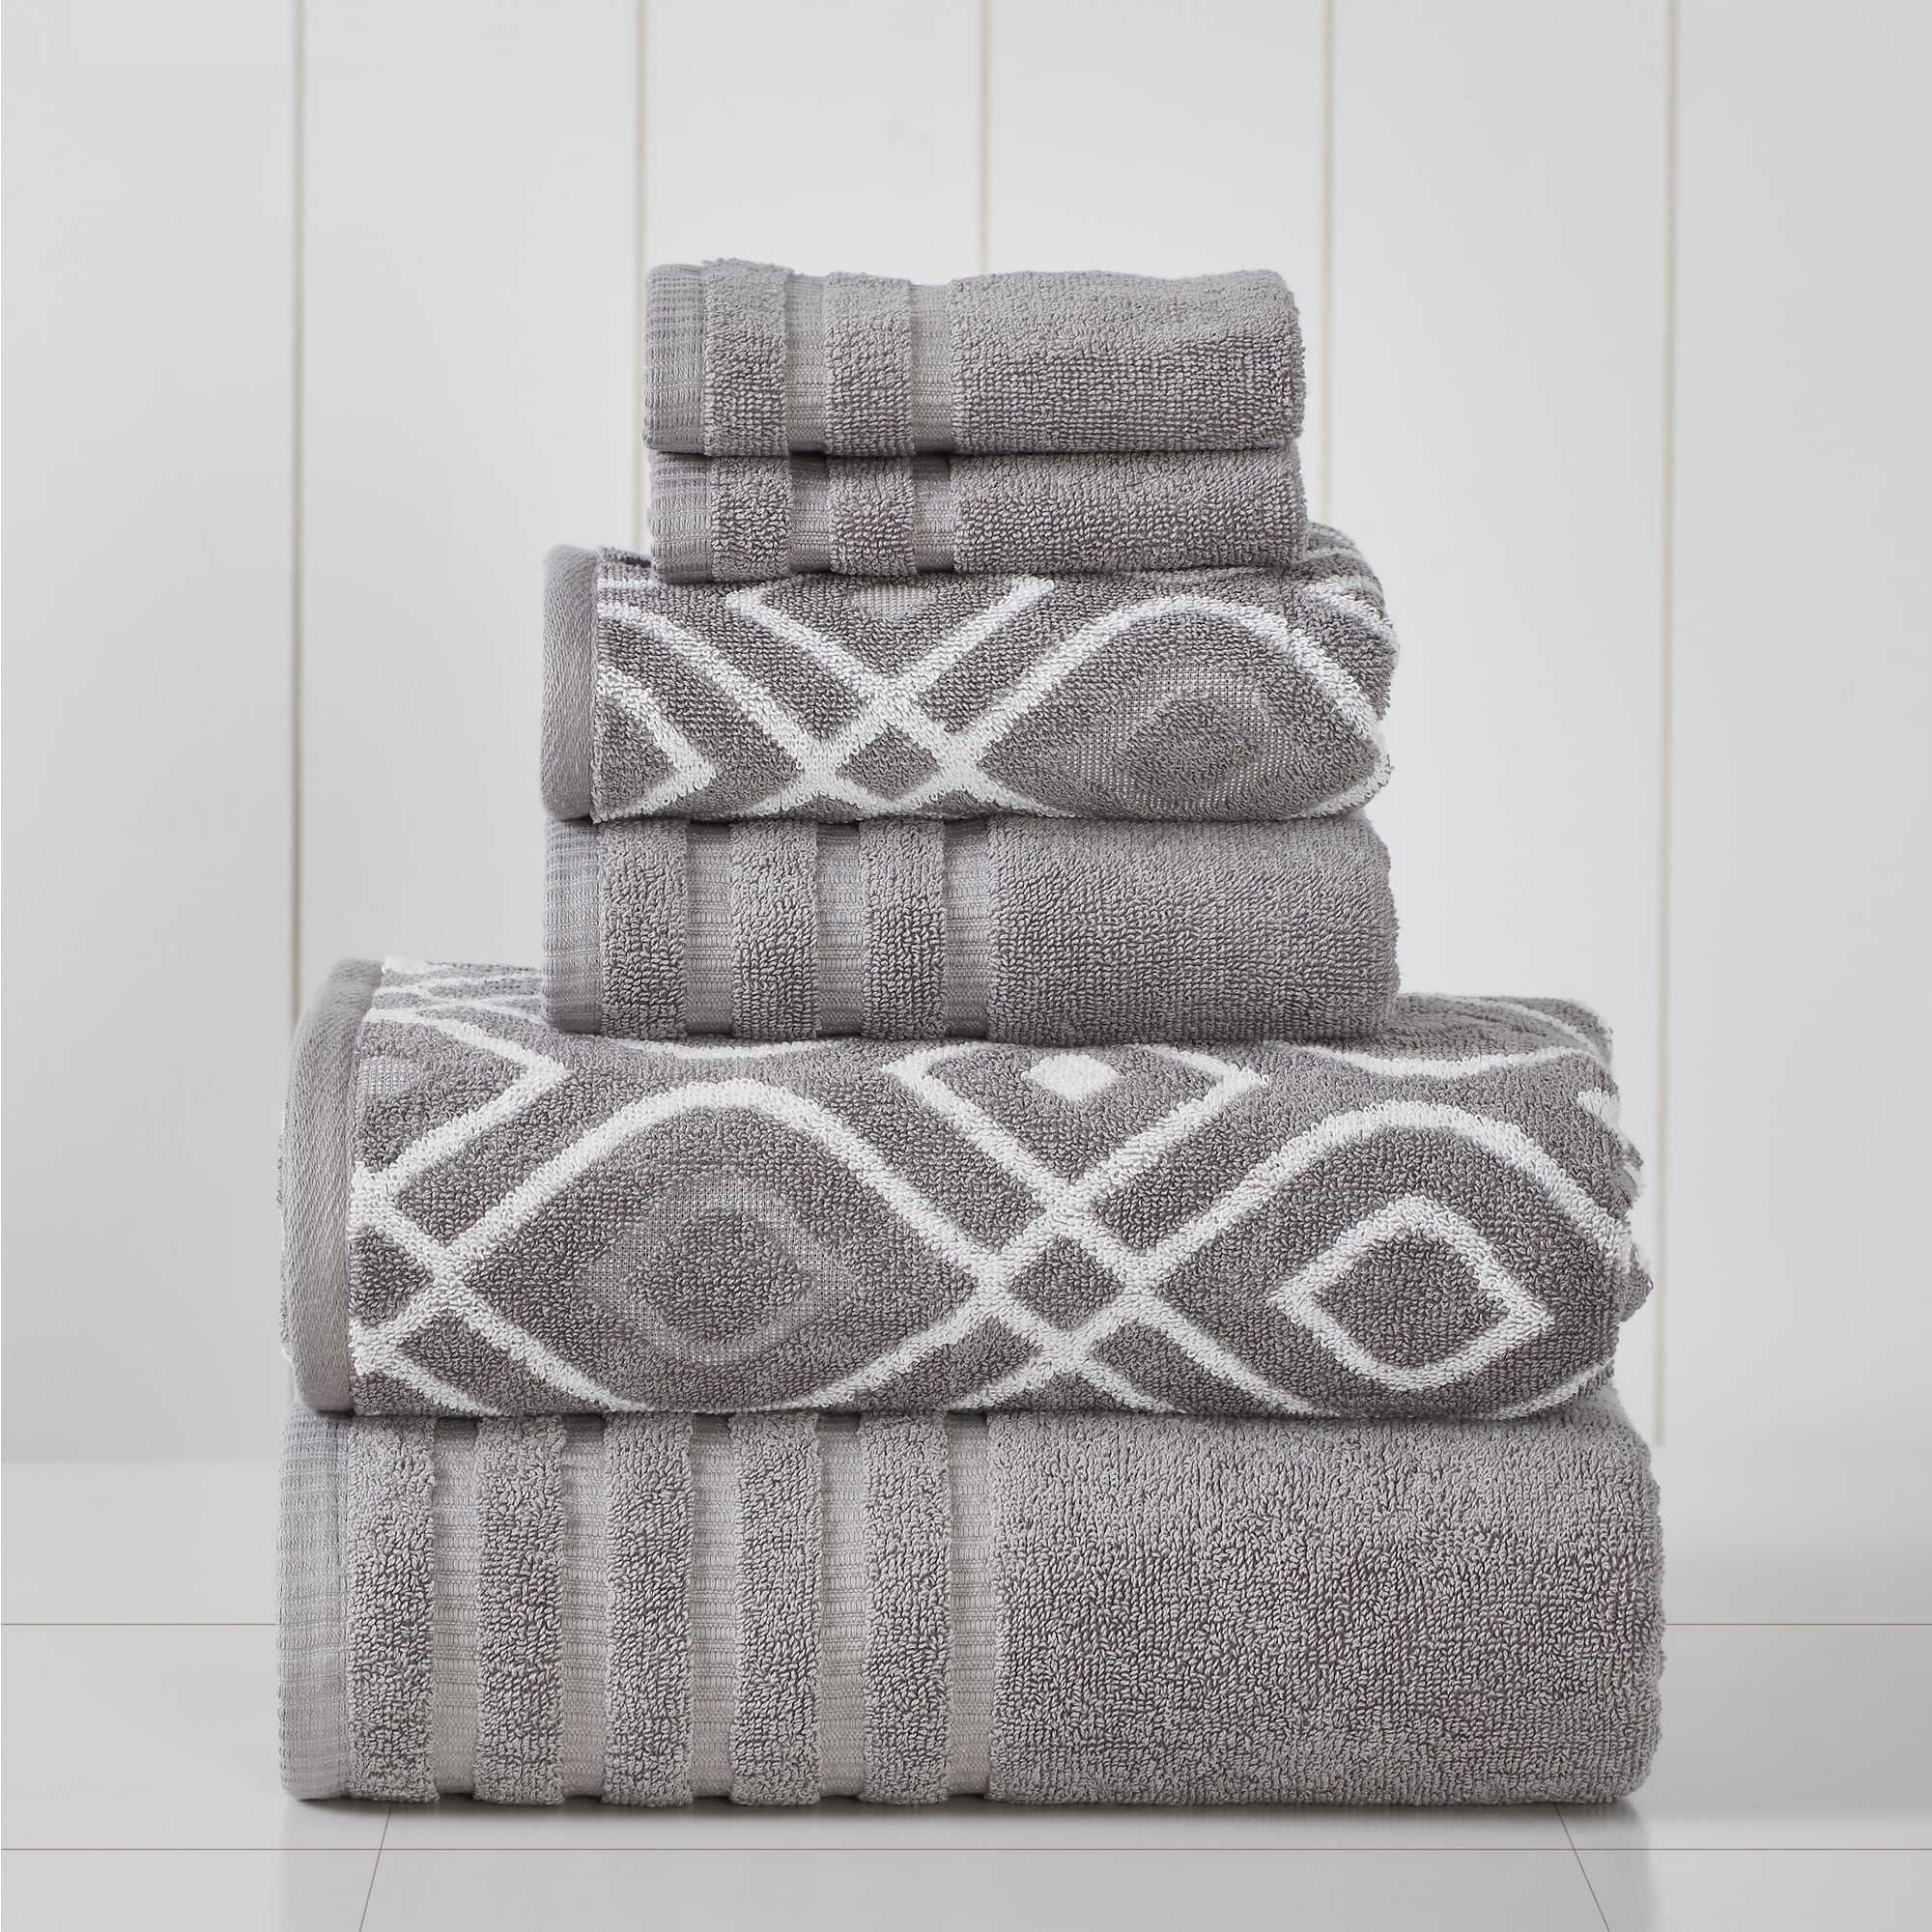 https://ak1.ostkcdn.com/images/products/is/images/direct/572318502203fc1a17065890be8b8fa9fccb595b/Modern-Threads-6-Piece-Yarn-Dyed-Oxford-Towel-Set.jpg